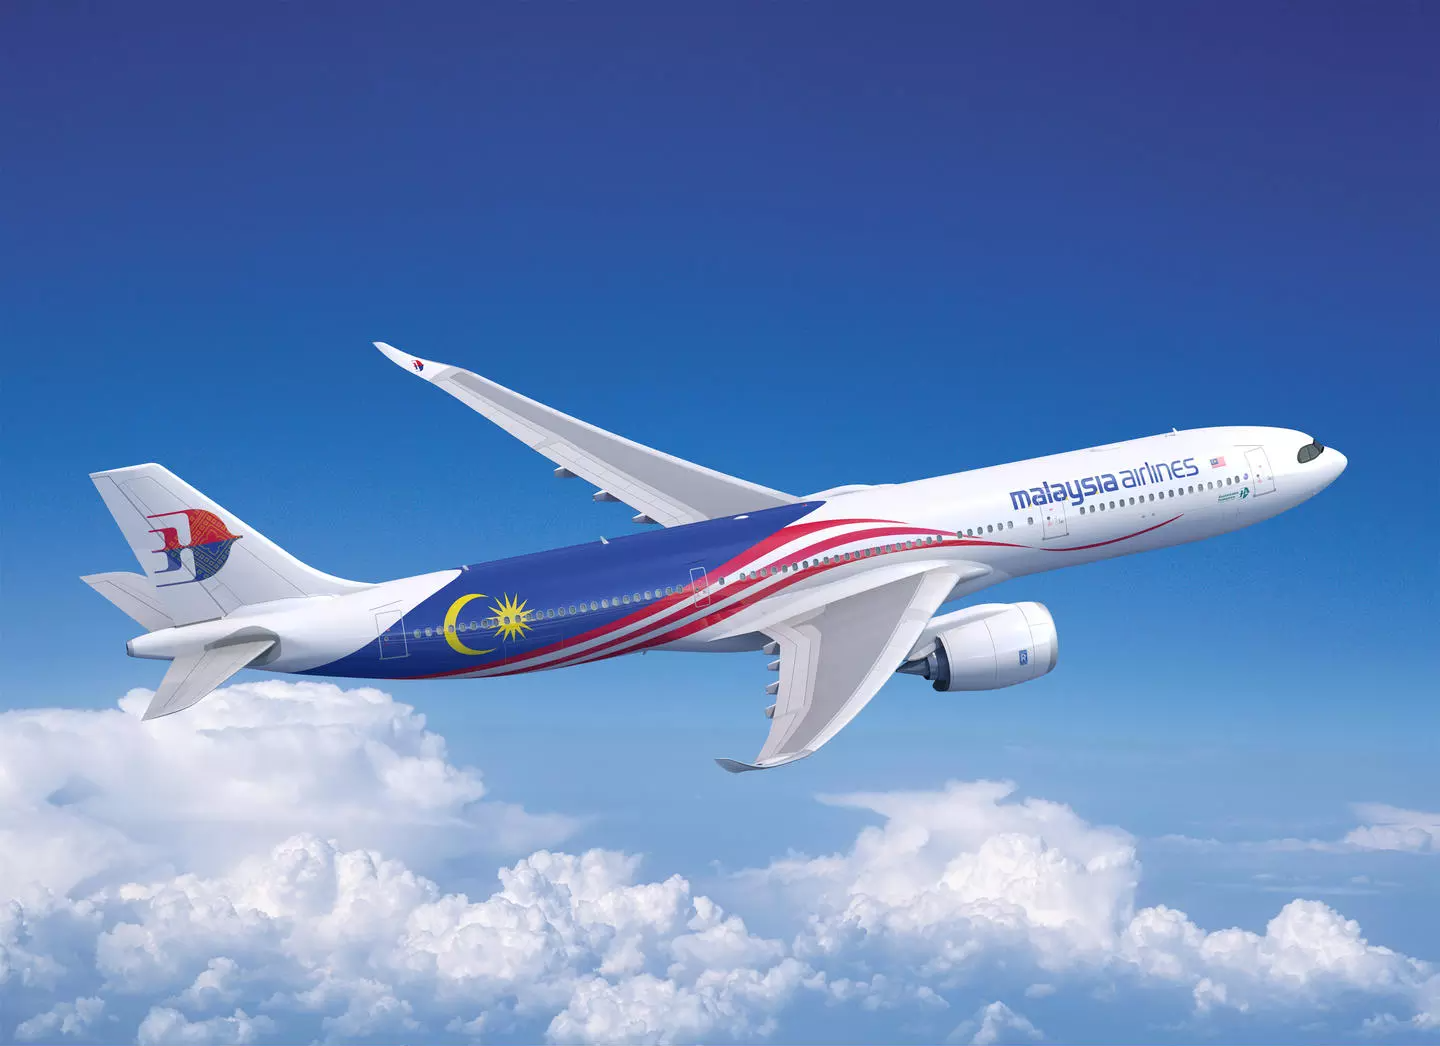 Malaysia Airlines Airbus A330neo Rendering